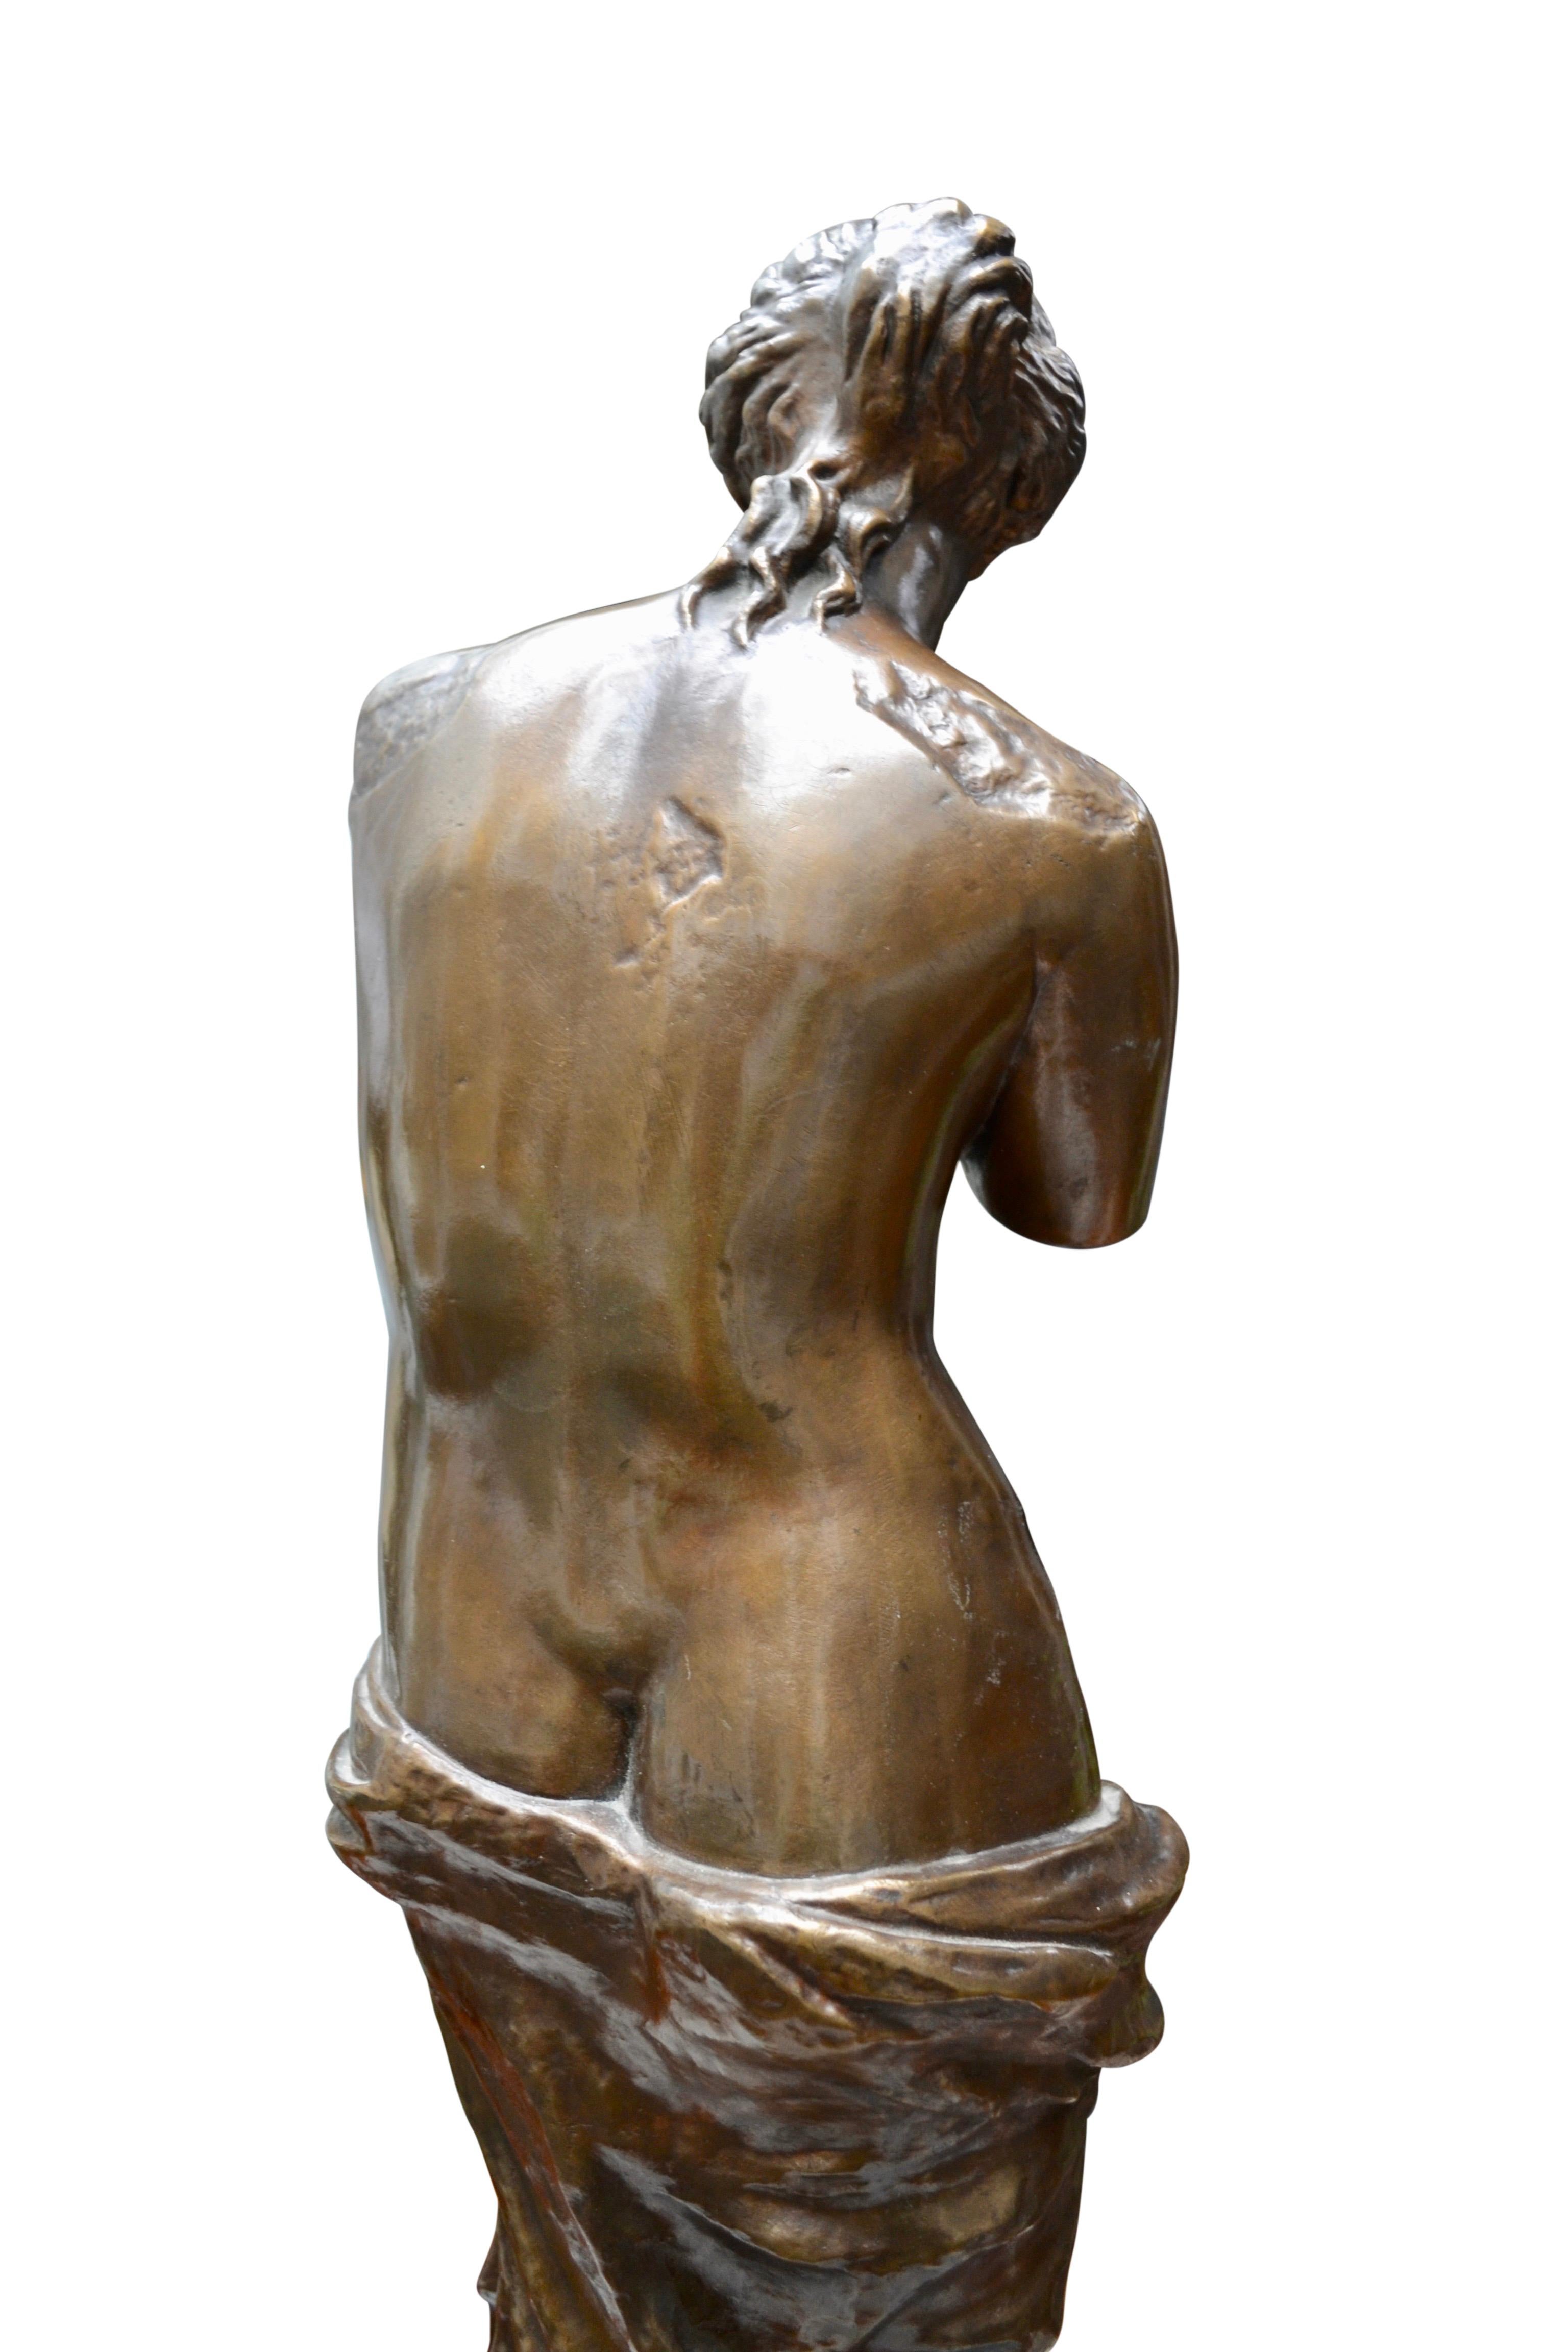 A very fine Grand Tour bronze study of the famous Venus de Milo with excellent rich brown patina and good hand finished surface detail. The casting is unusual in that it does not pretend to hide the many imperfections on the original.

It is signed